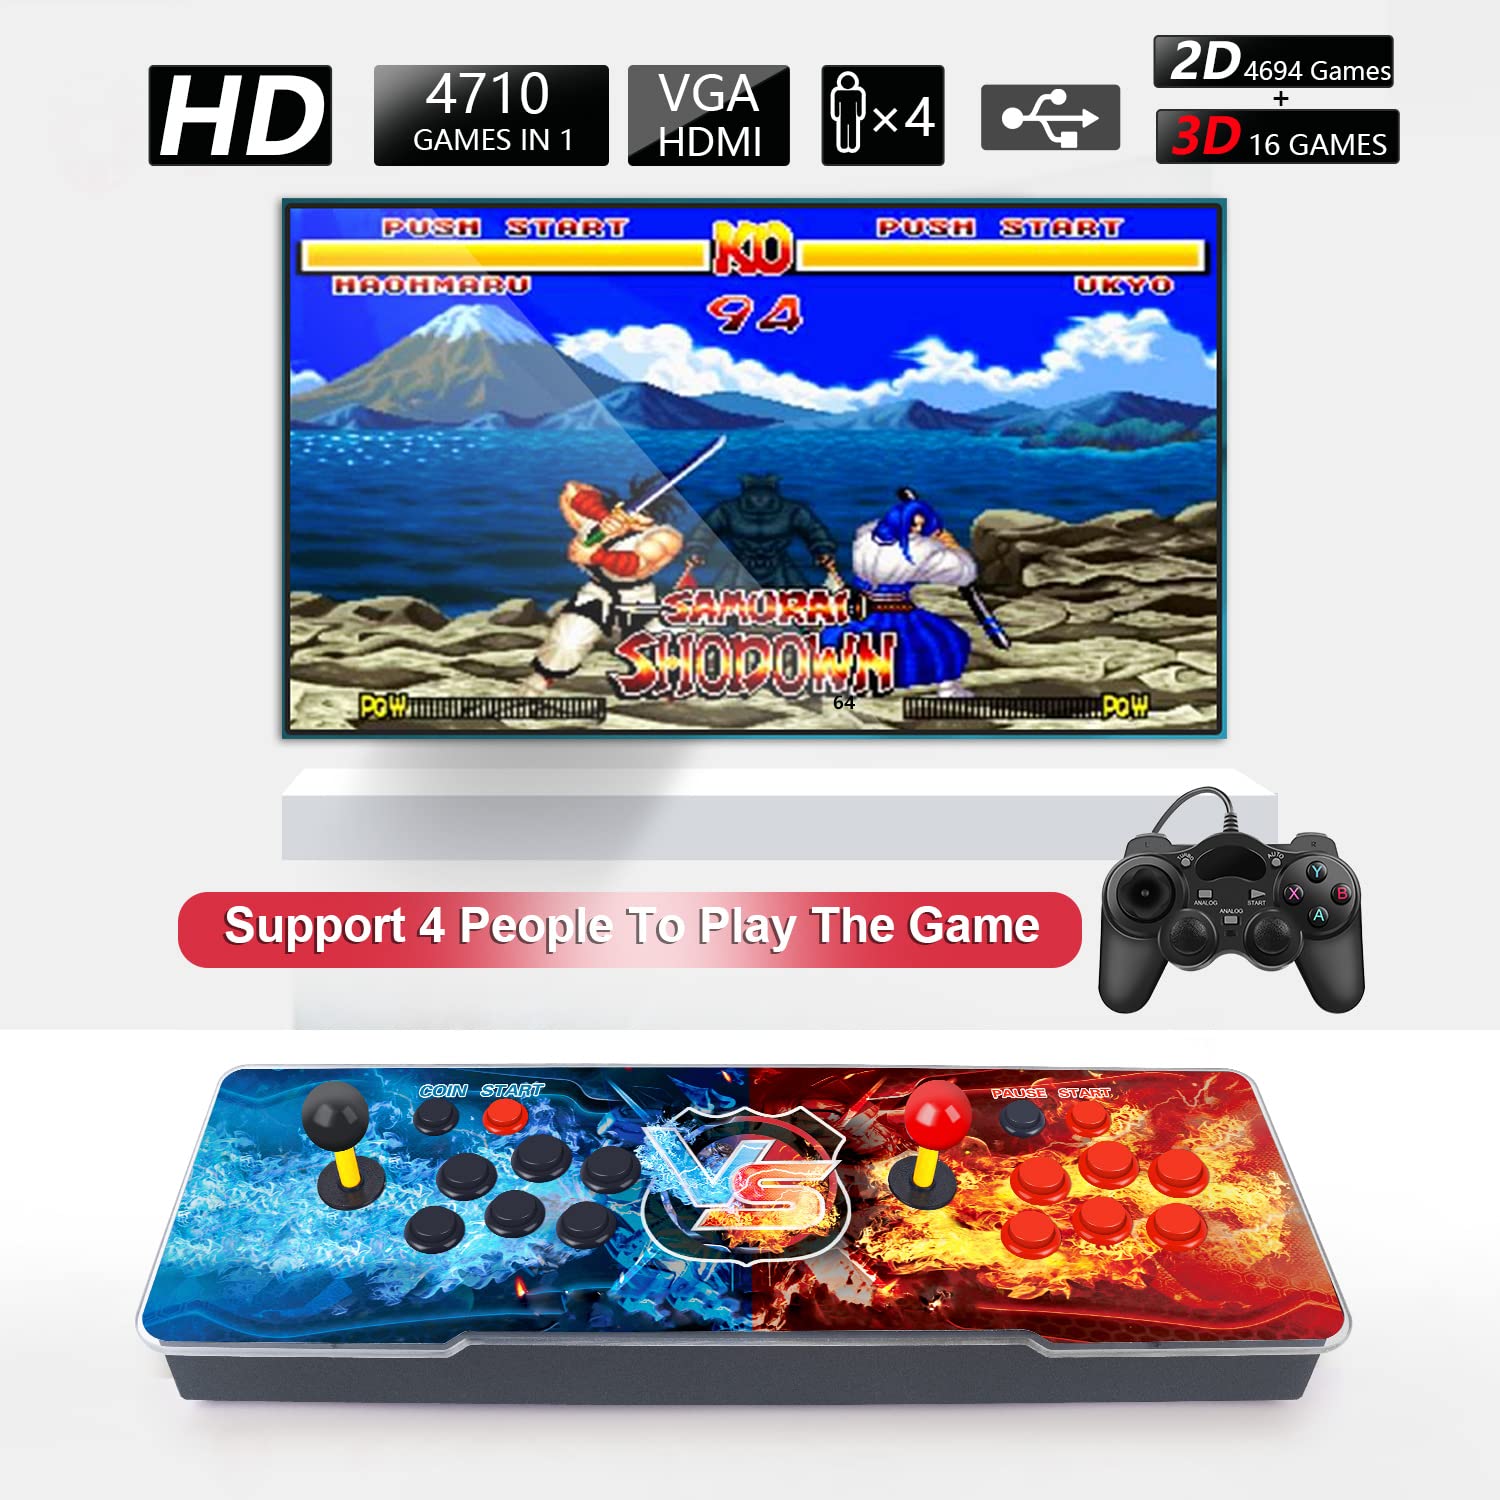  Cehim【14000 Games in 1】 3D+ Games Arcade - Support 3D Games,  1280x720,Search/Save/Hide/Pause Games, Favorite List, 4 Players Online Game  : Toys & Games